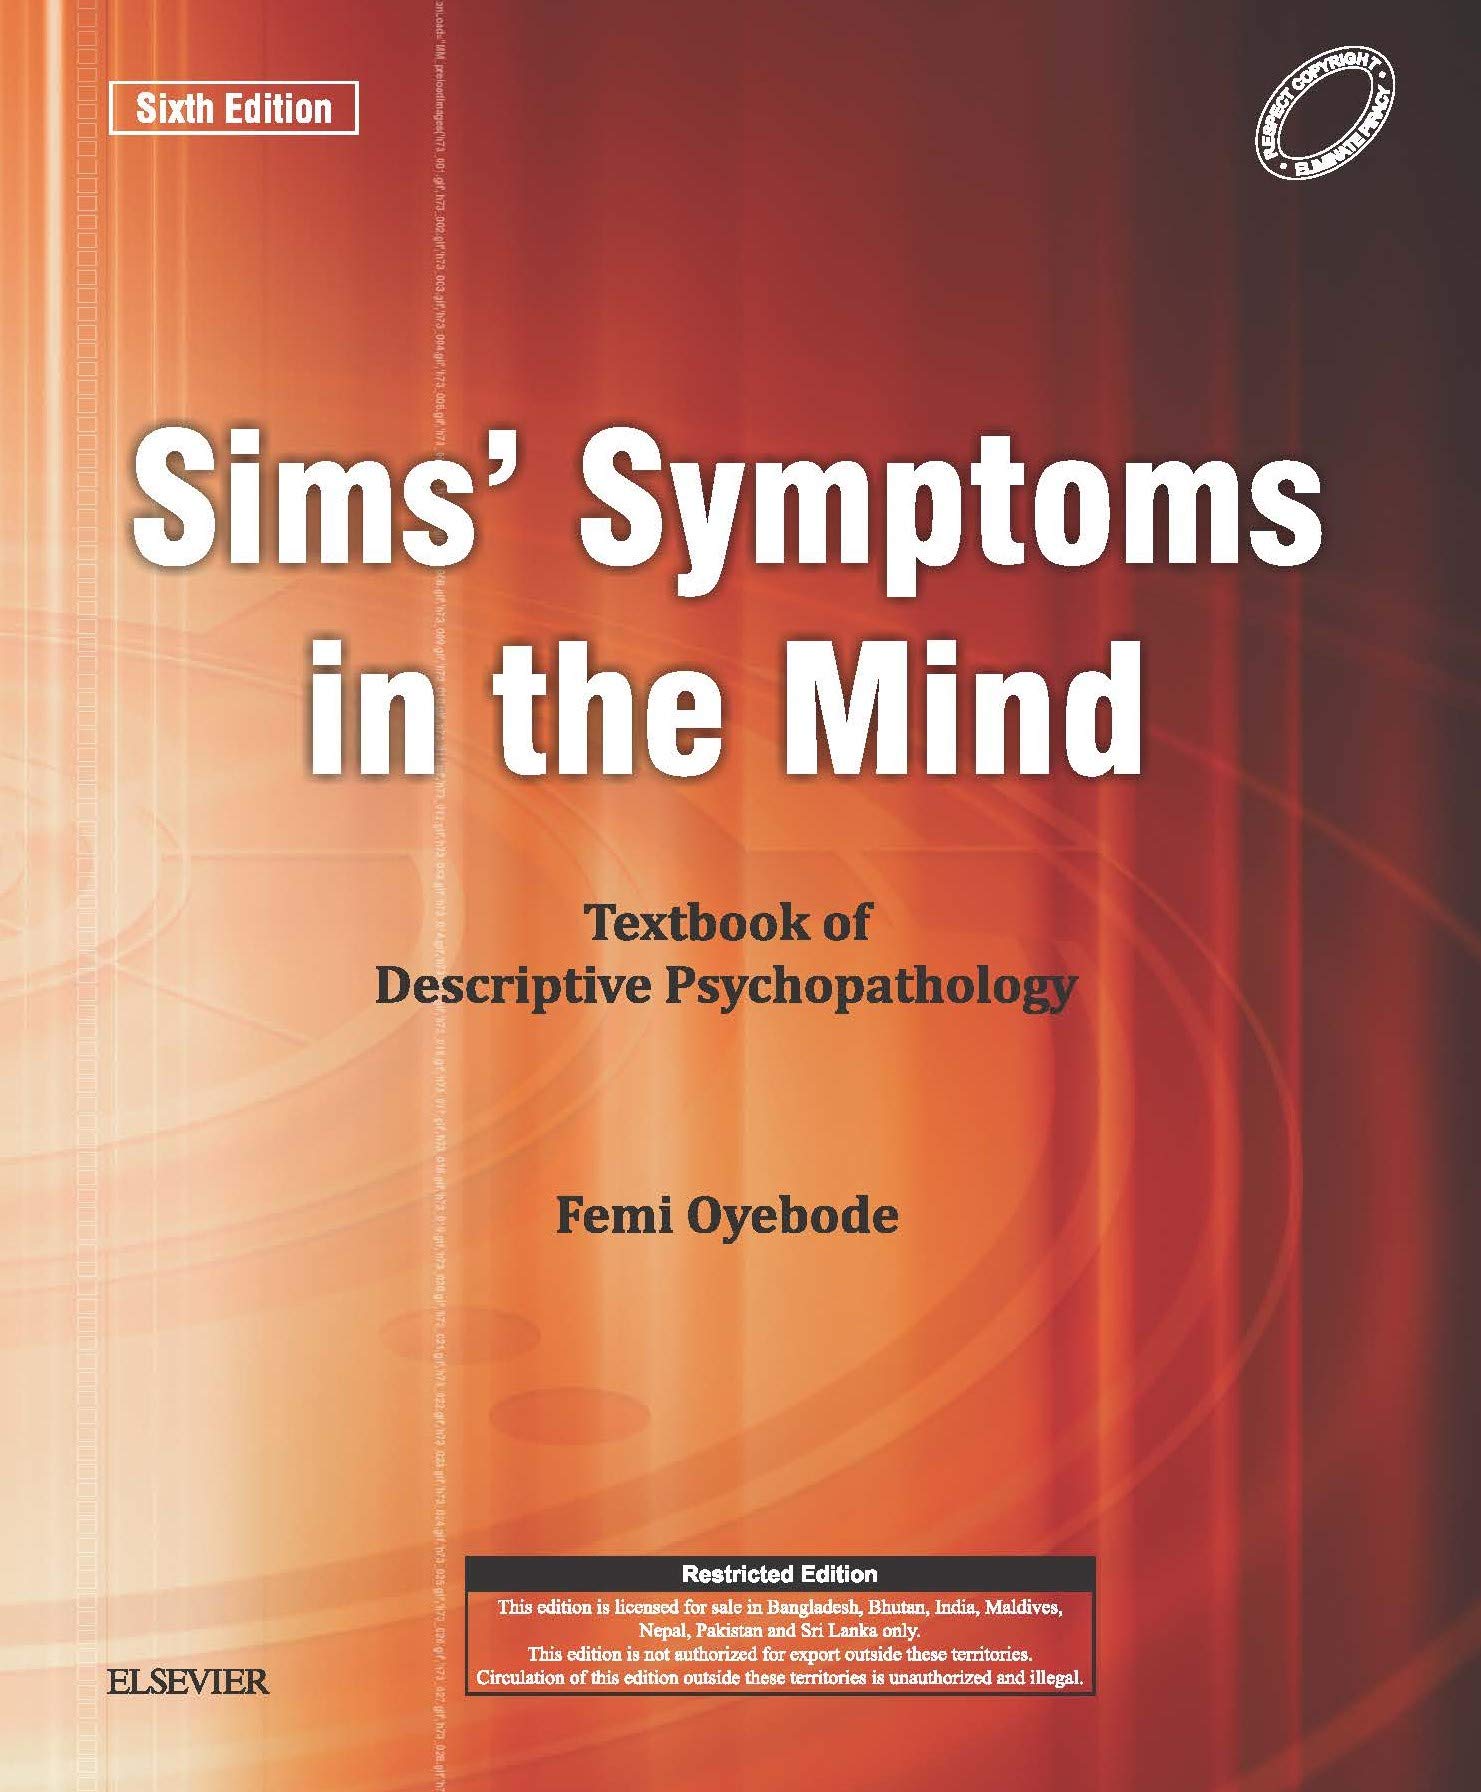 sims-symptoms-in-the-mind-textbook-of-descriptive-psychopathology-6e